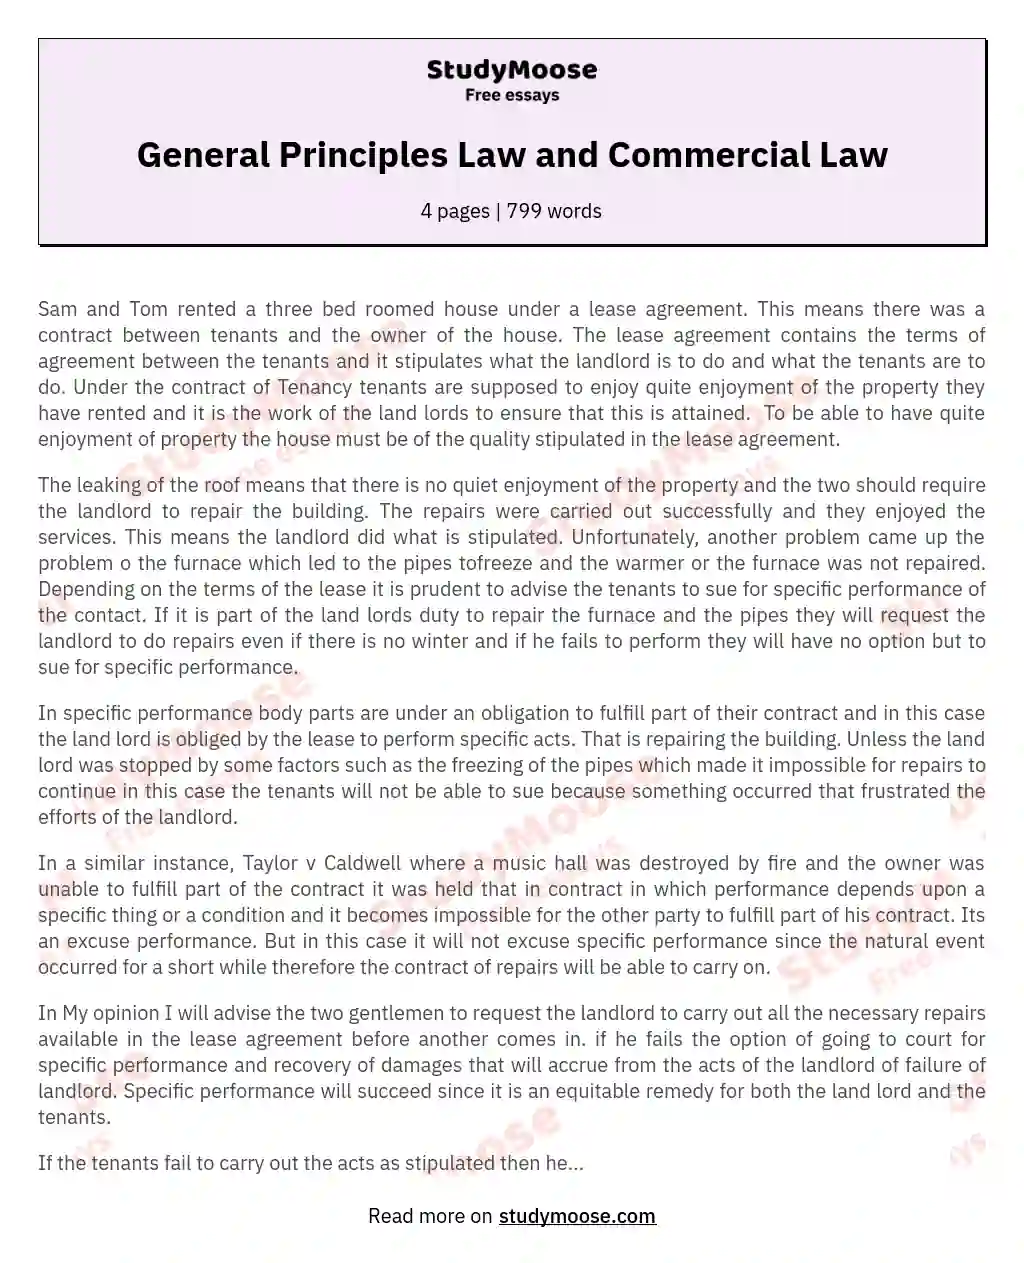 General Principles Law and Commercial Law